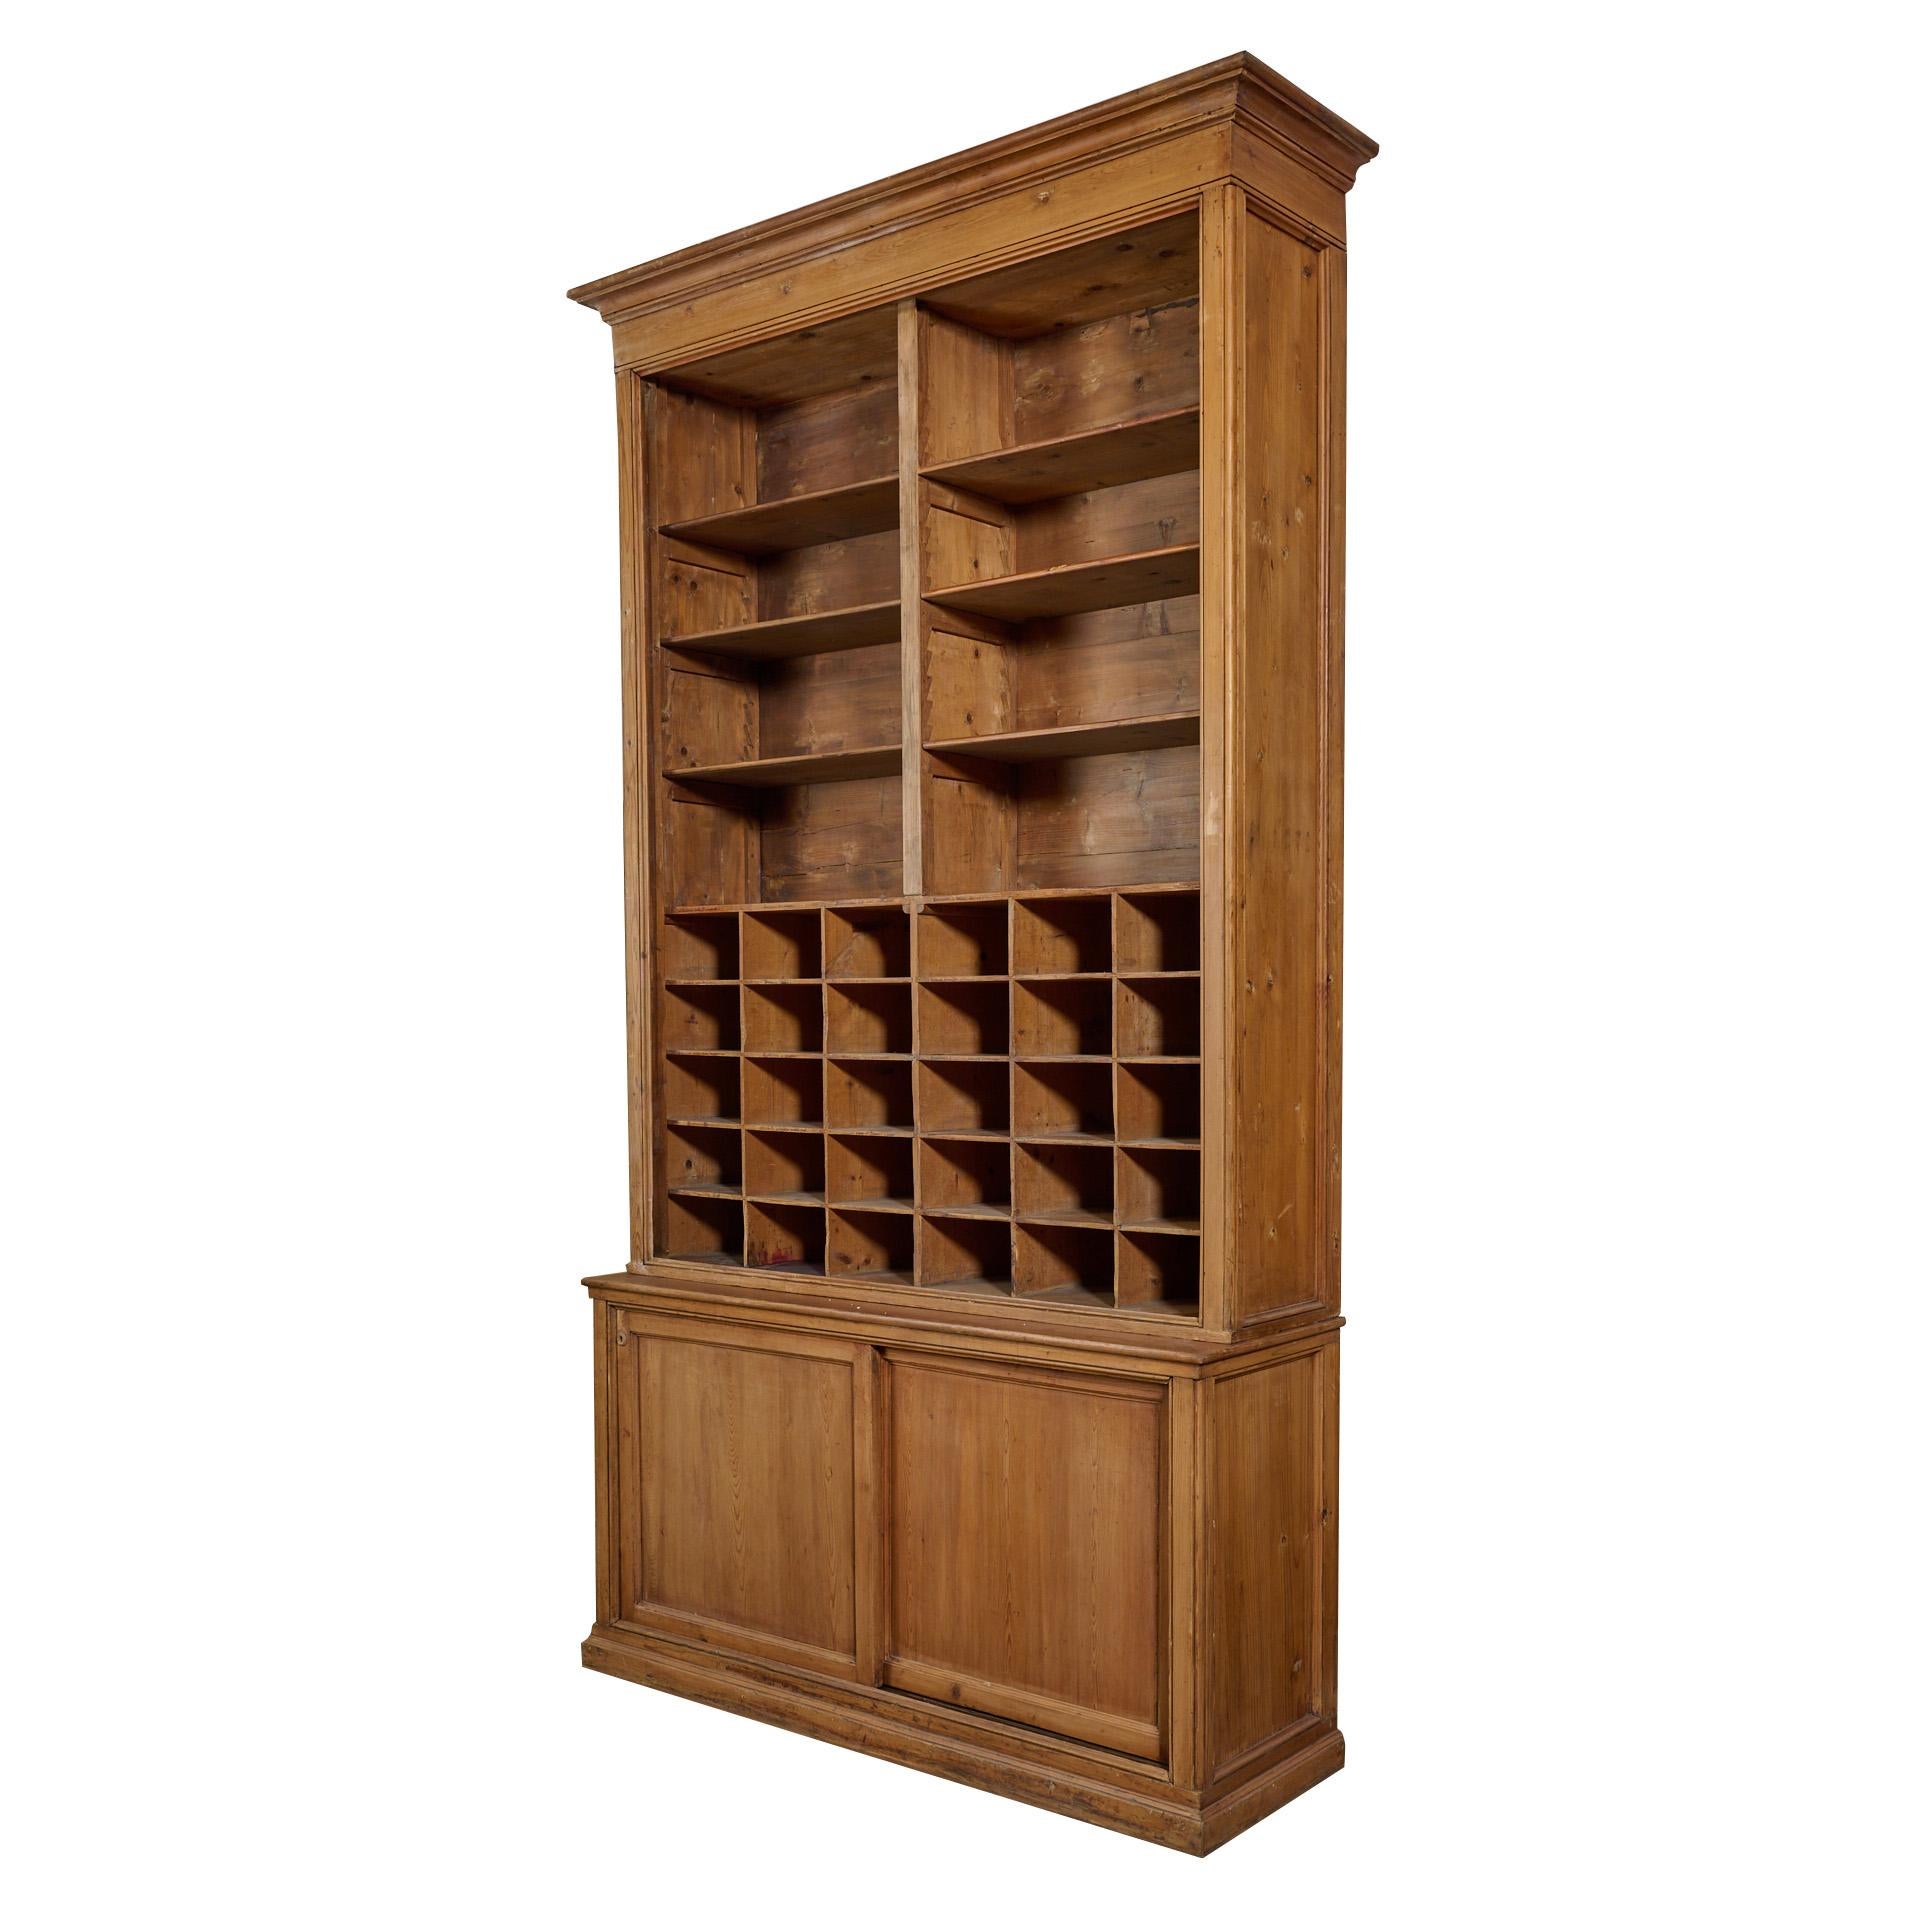 The best two tier pine cabinet with shelving, cubby holes, and base cabinet. Fantastic Quality. Two available, priced per single unit.